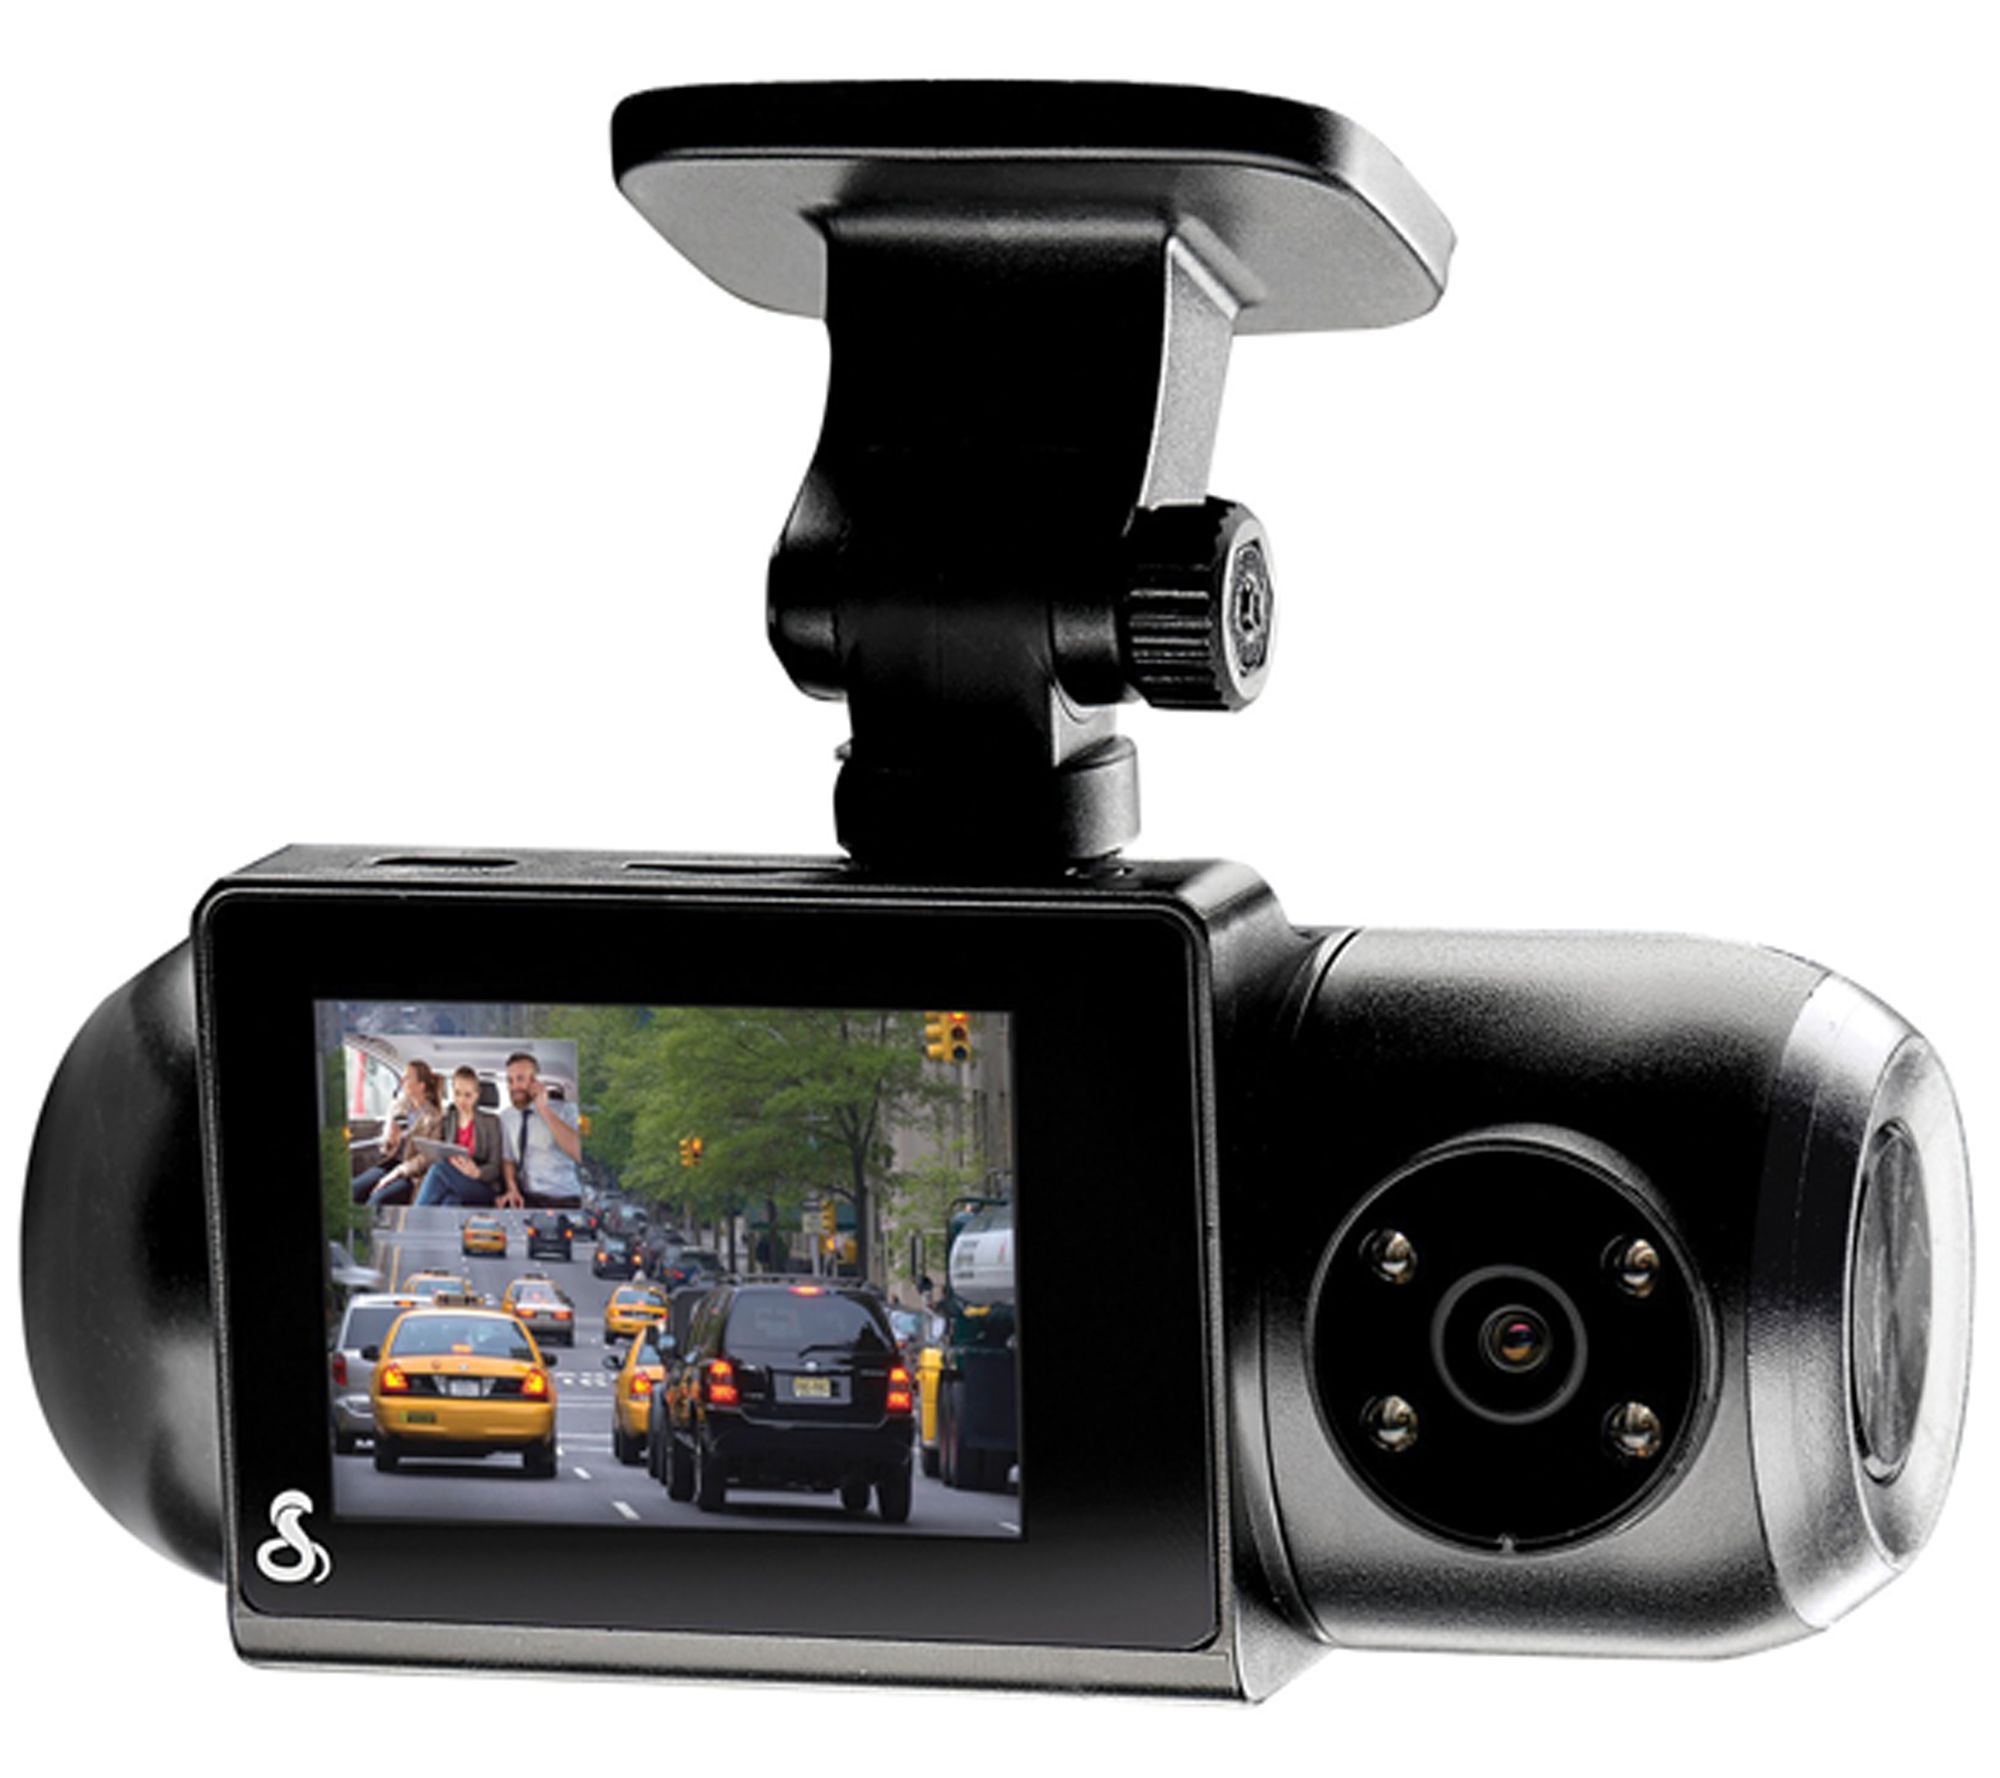 Minolta MNCD410T FHD Front & Rear View Dash Camera with 3-Ch